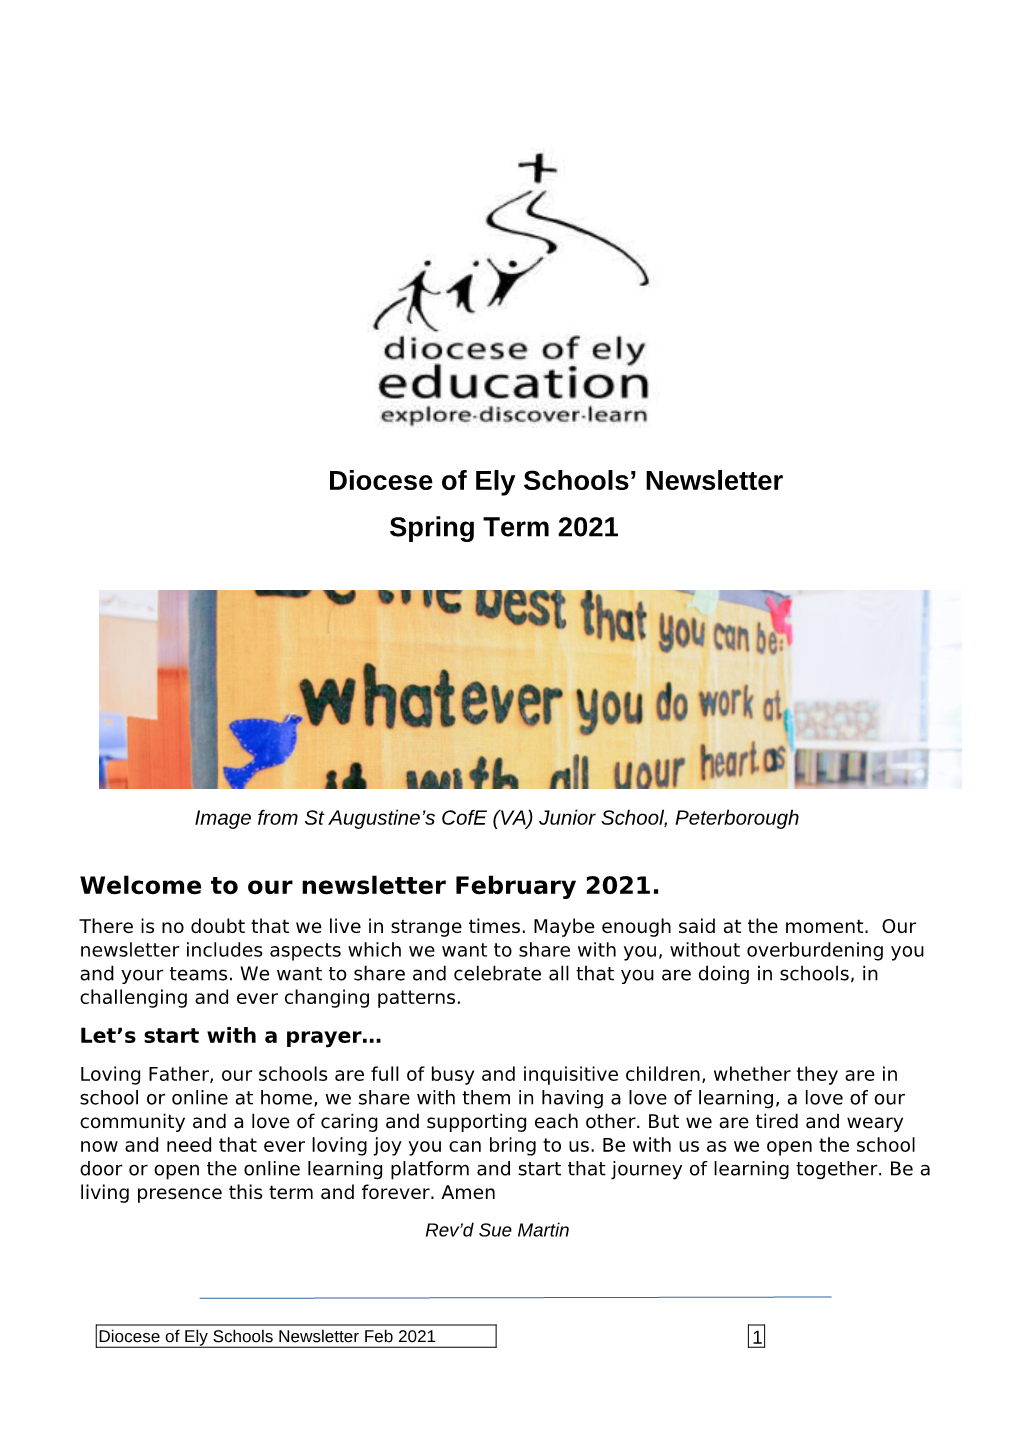 Diocese of Ely Schools' Newsletter Spring Term 2021